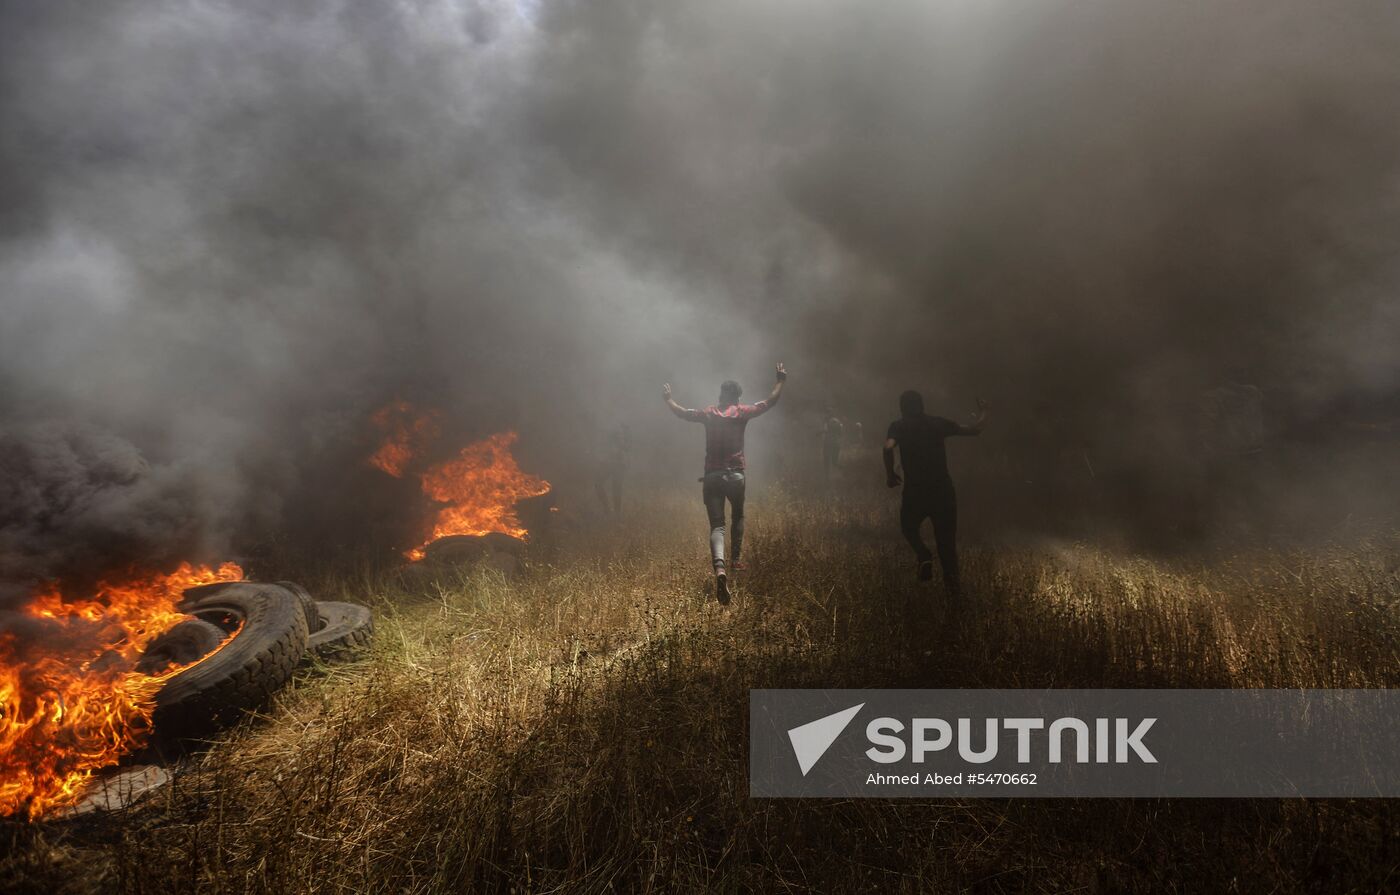 Protests on Gaza Strip's border with Israel